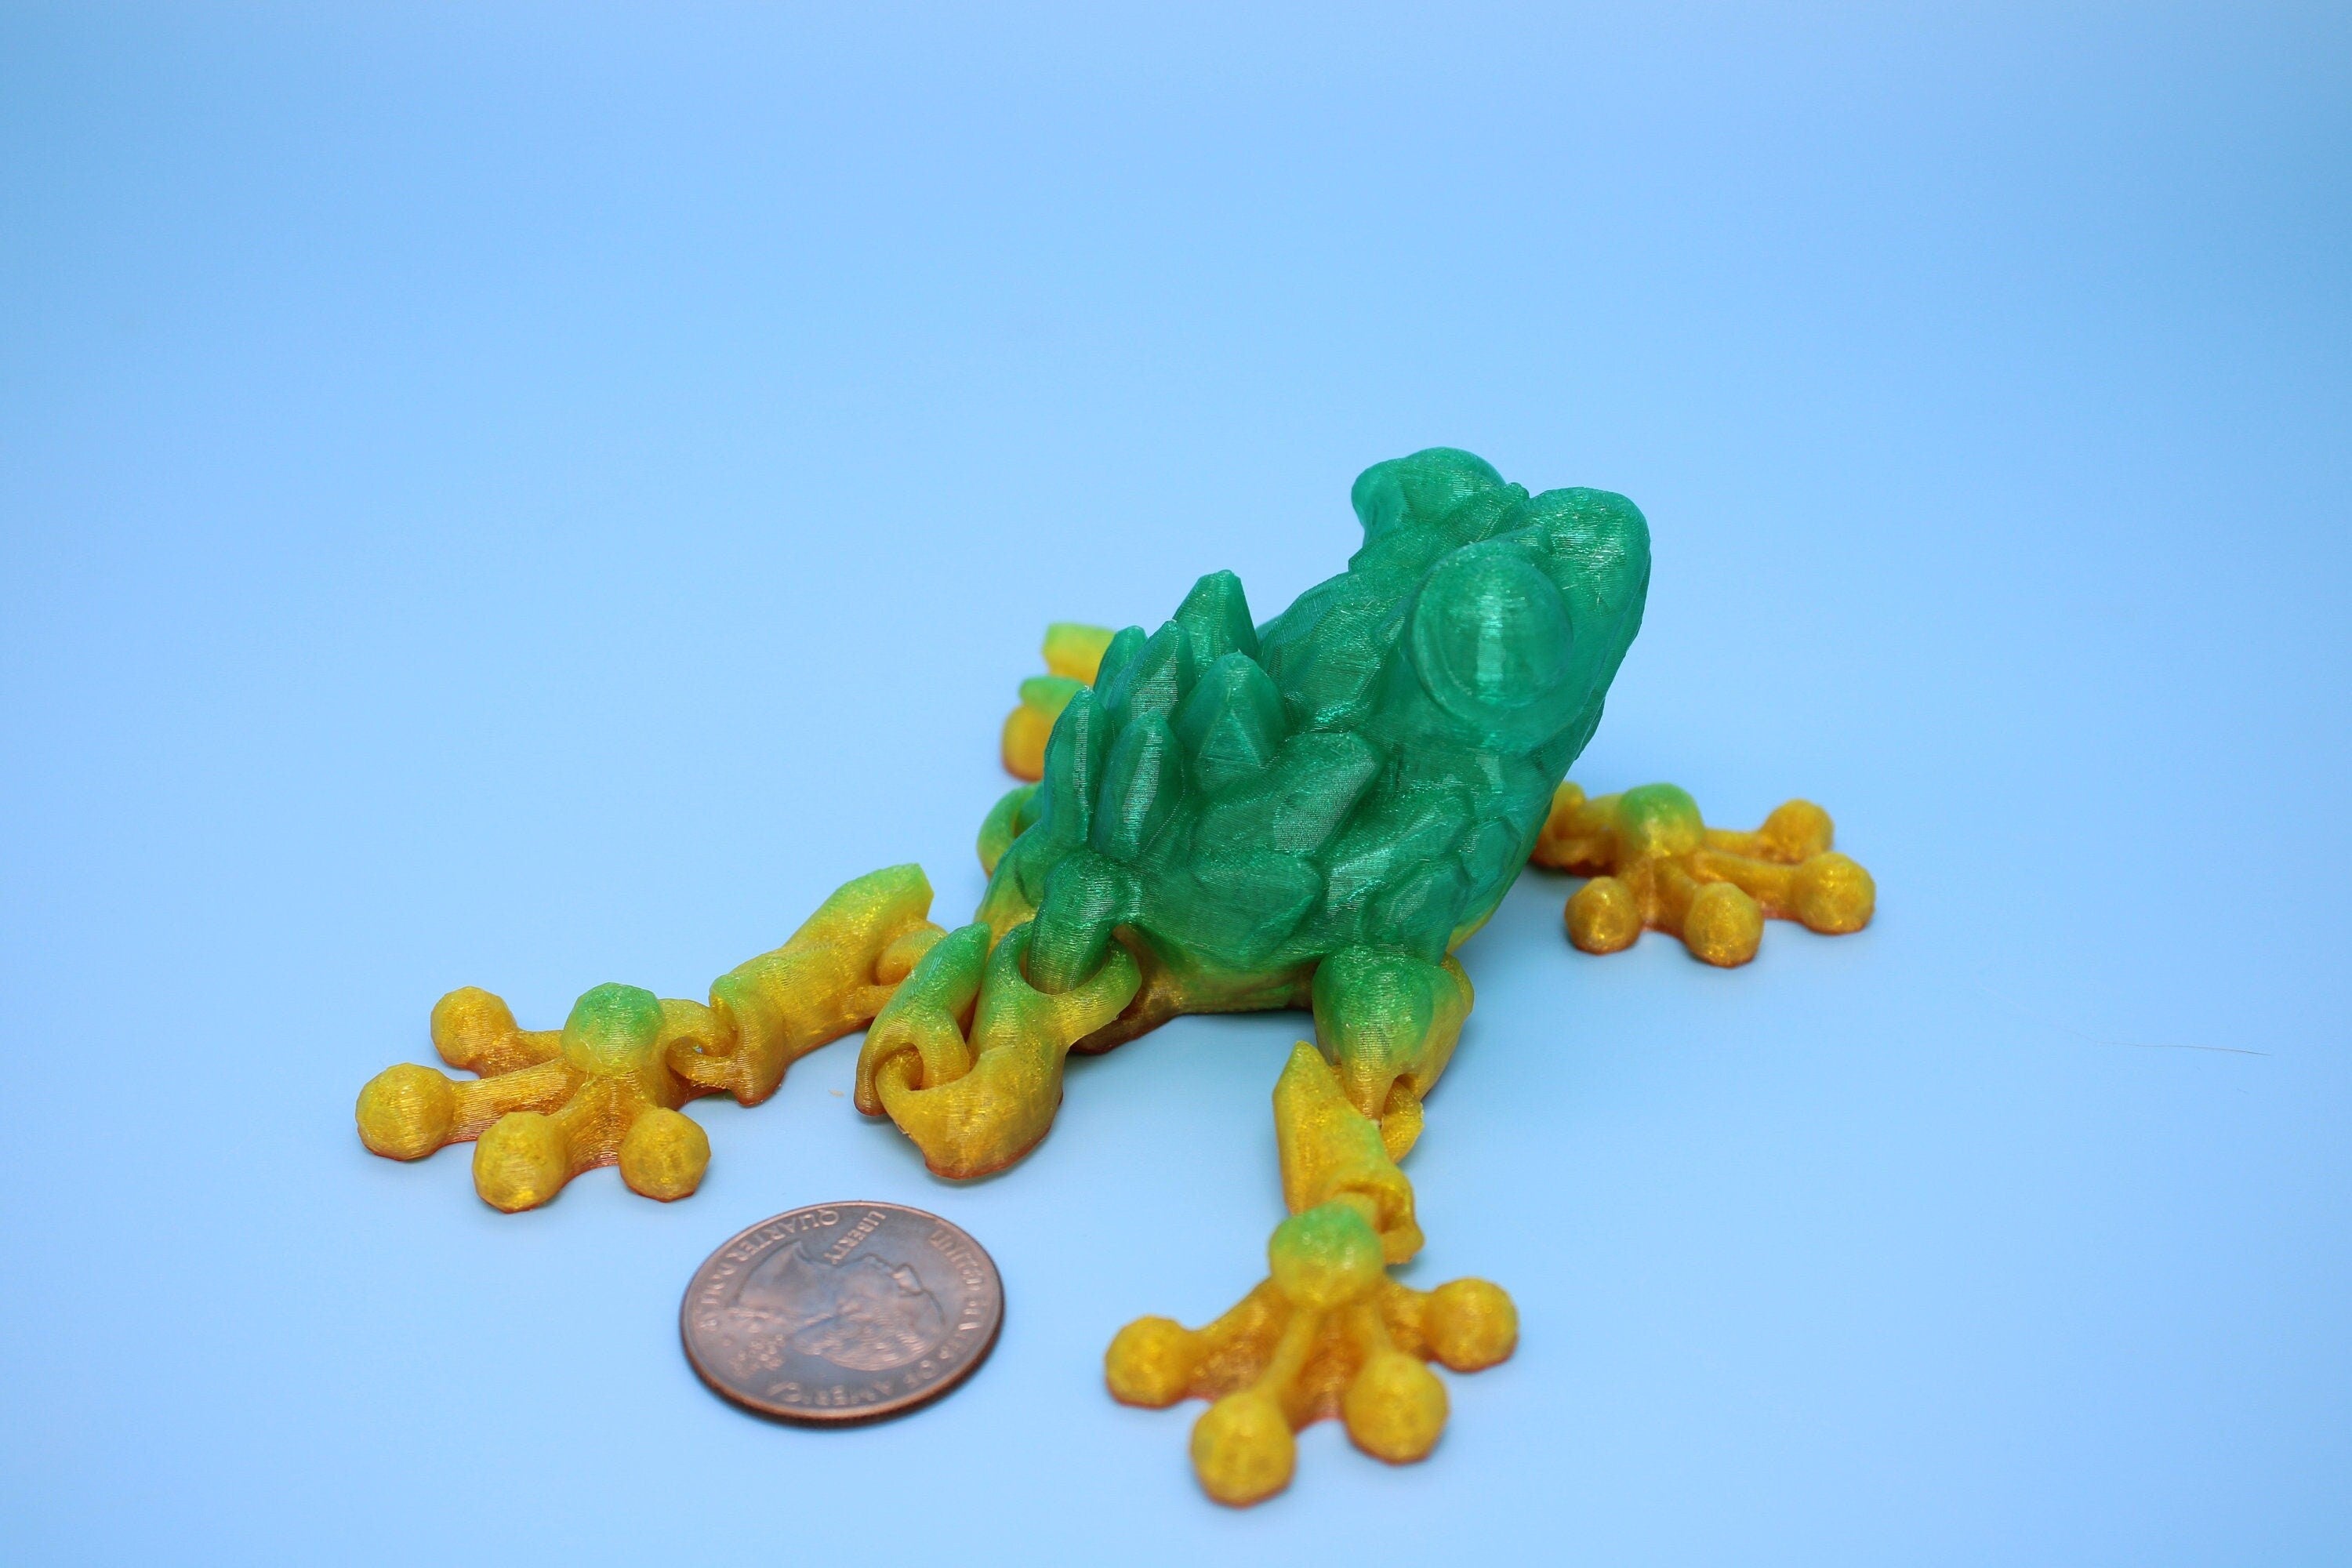 Miniature Flexible Crystal Frog | 3D Printed Crystal Cute Frog | 5.5 inches | Friendly Frog | Sensory Toy | Fidget Toy | Articulating Frog.